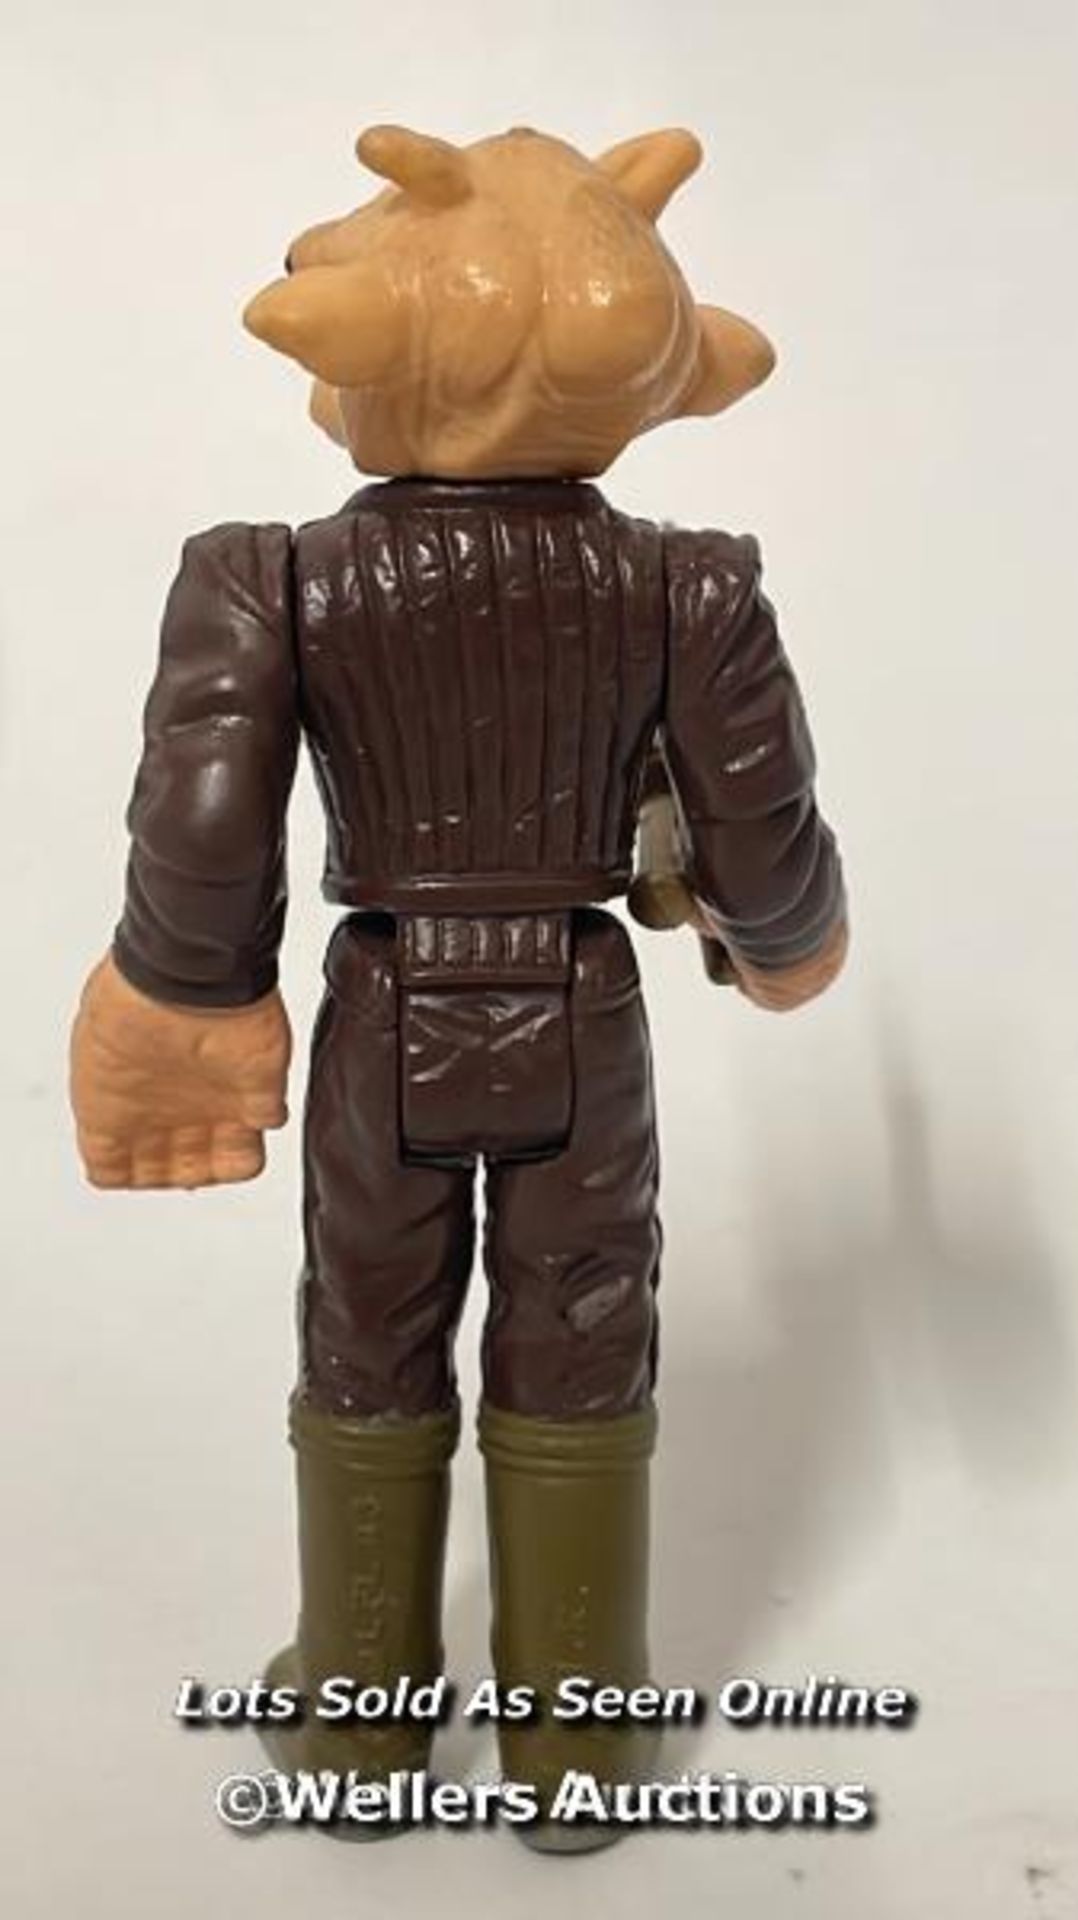 Vintage Star Wars Return of the Jedi lot including Rancor Keeper - HK, 1983 with weapon, Ree - Image 6 of 13